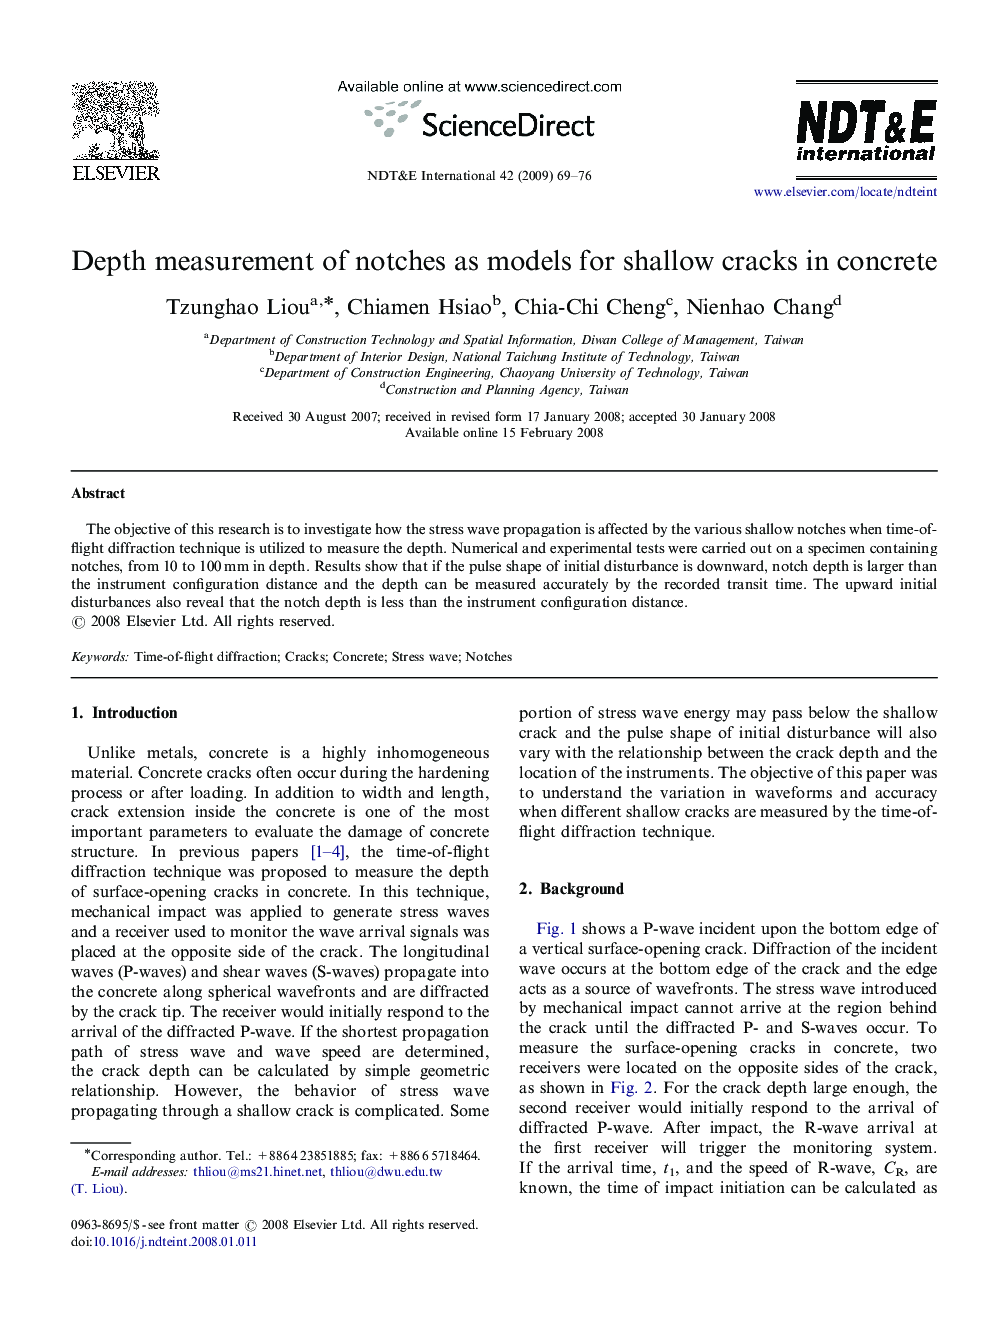 Depth measurement of notches as models for shallow cracks in concrete